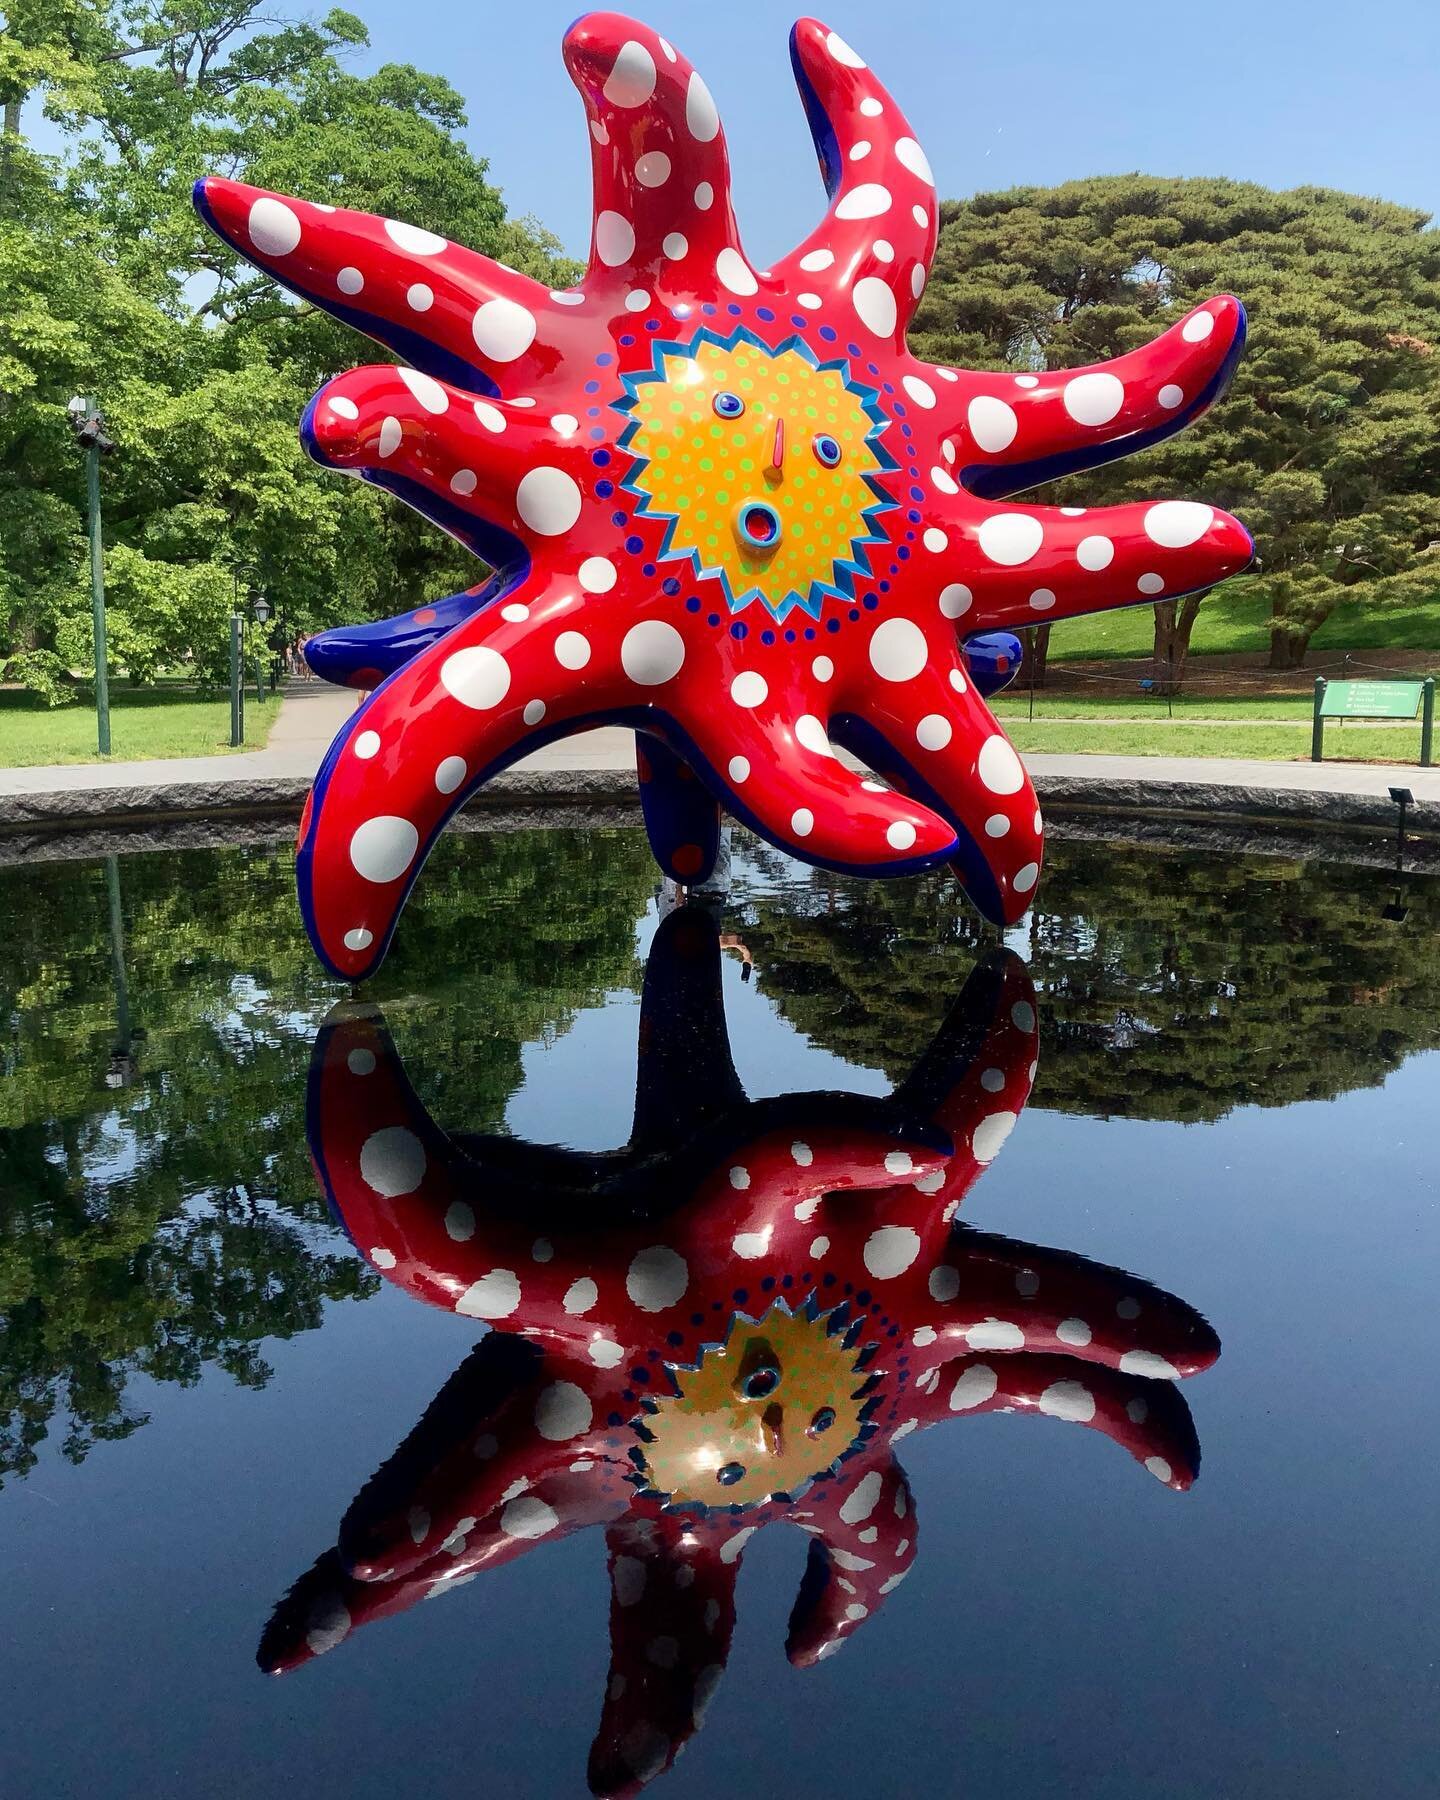 Went to see #Kusama @nybg and to see #rhododendron #laurel #iris #peony all in peak #bloom 🌸 So much to see at the #BotanicalGarden and in the #Bronx! #newyorker #tourguide #walkingtour #flowers #flowersofinstagram #art #architecture #nature #summer